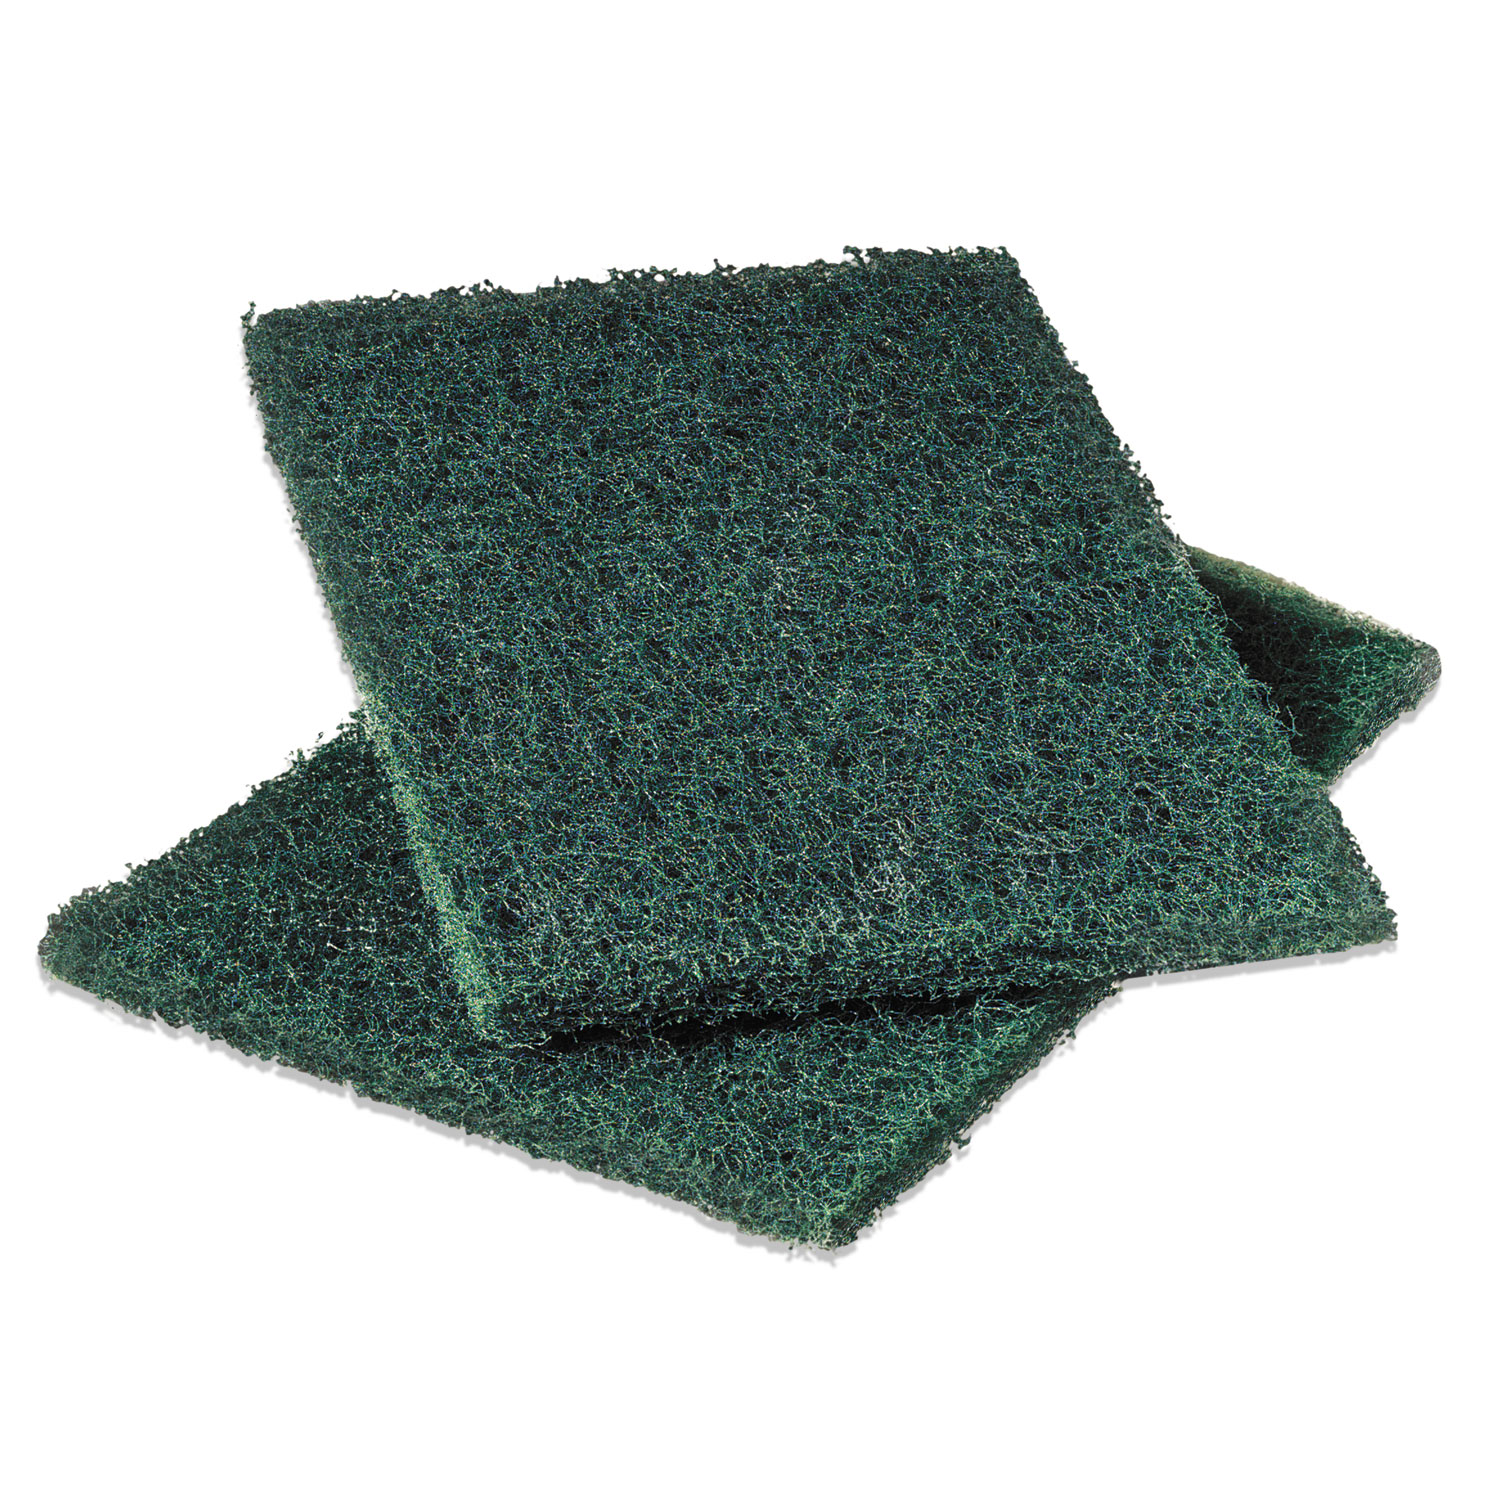  Scotch-Brite PROFESSIONAL 86 Commercial Heavy-Duty Scouring Pad, Green, 6 x 9, 12/Pack (MMM86) 